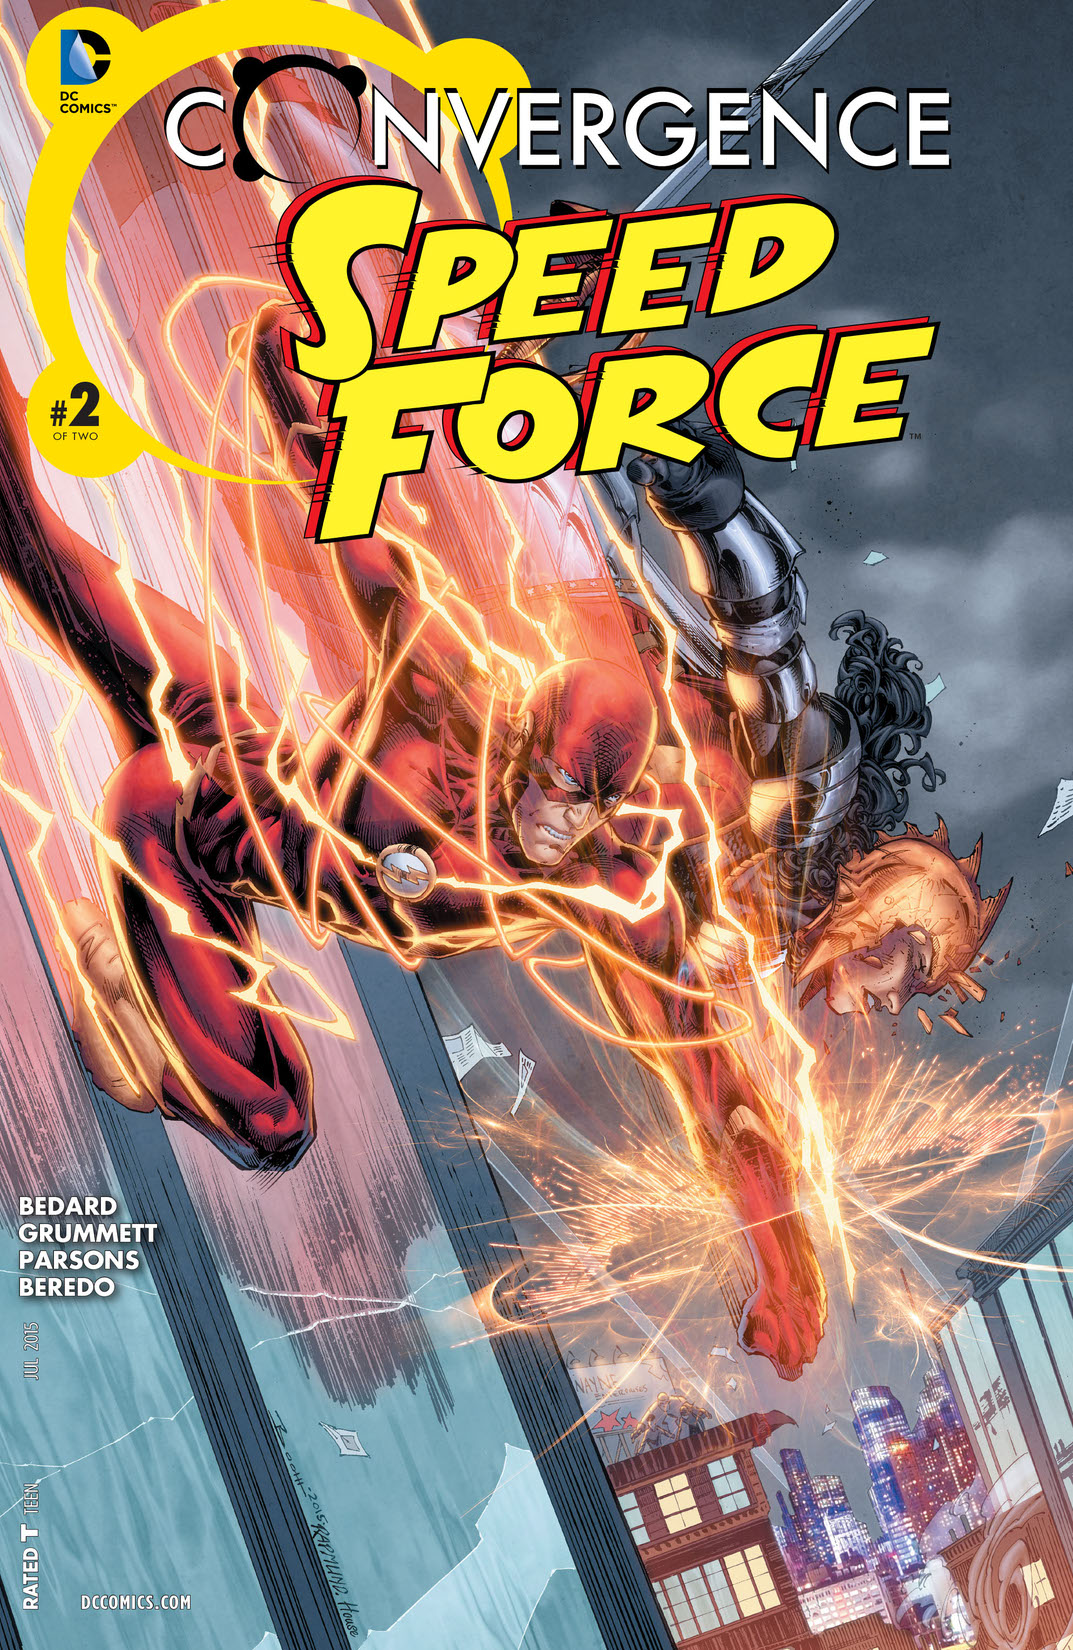 Convergence: Speed Force #2 preview images